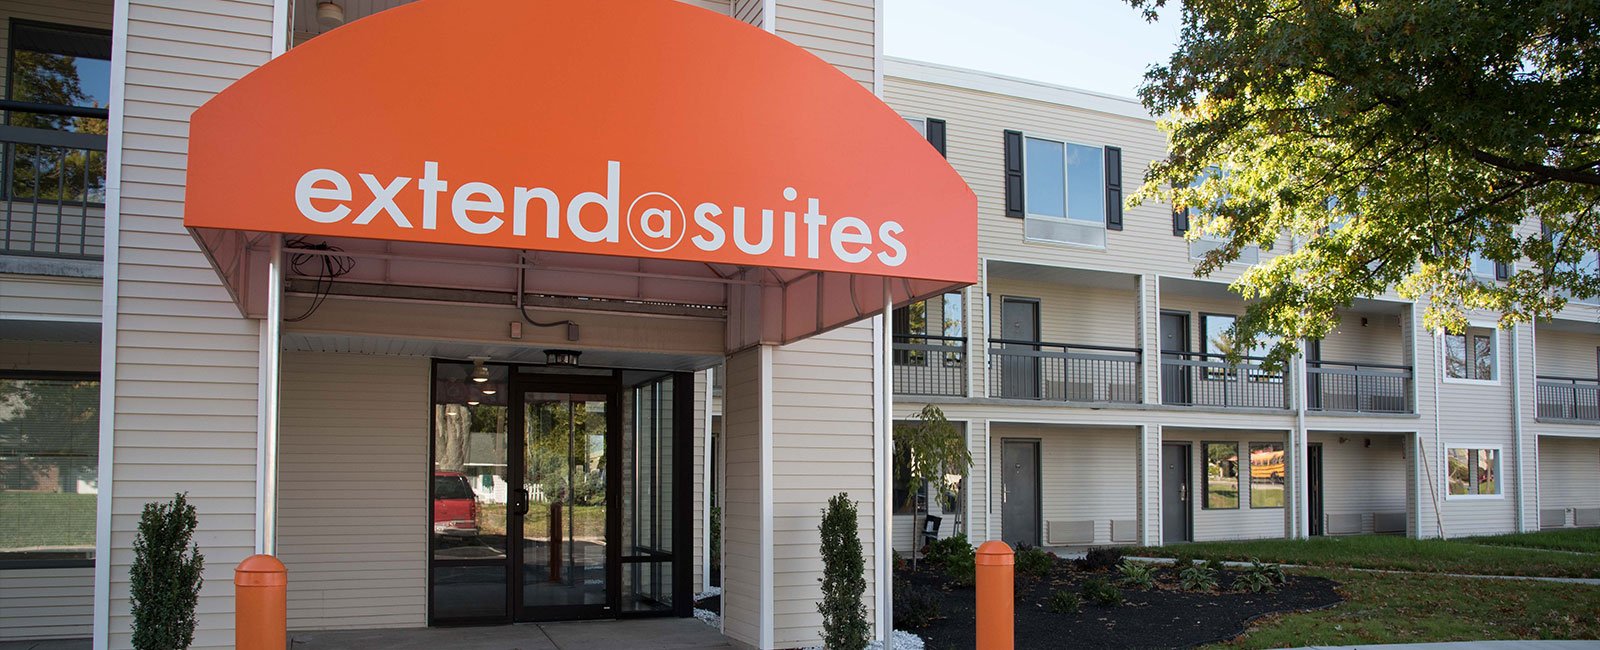 Licensing Opportunities -Extend-a-Suites